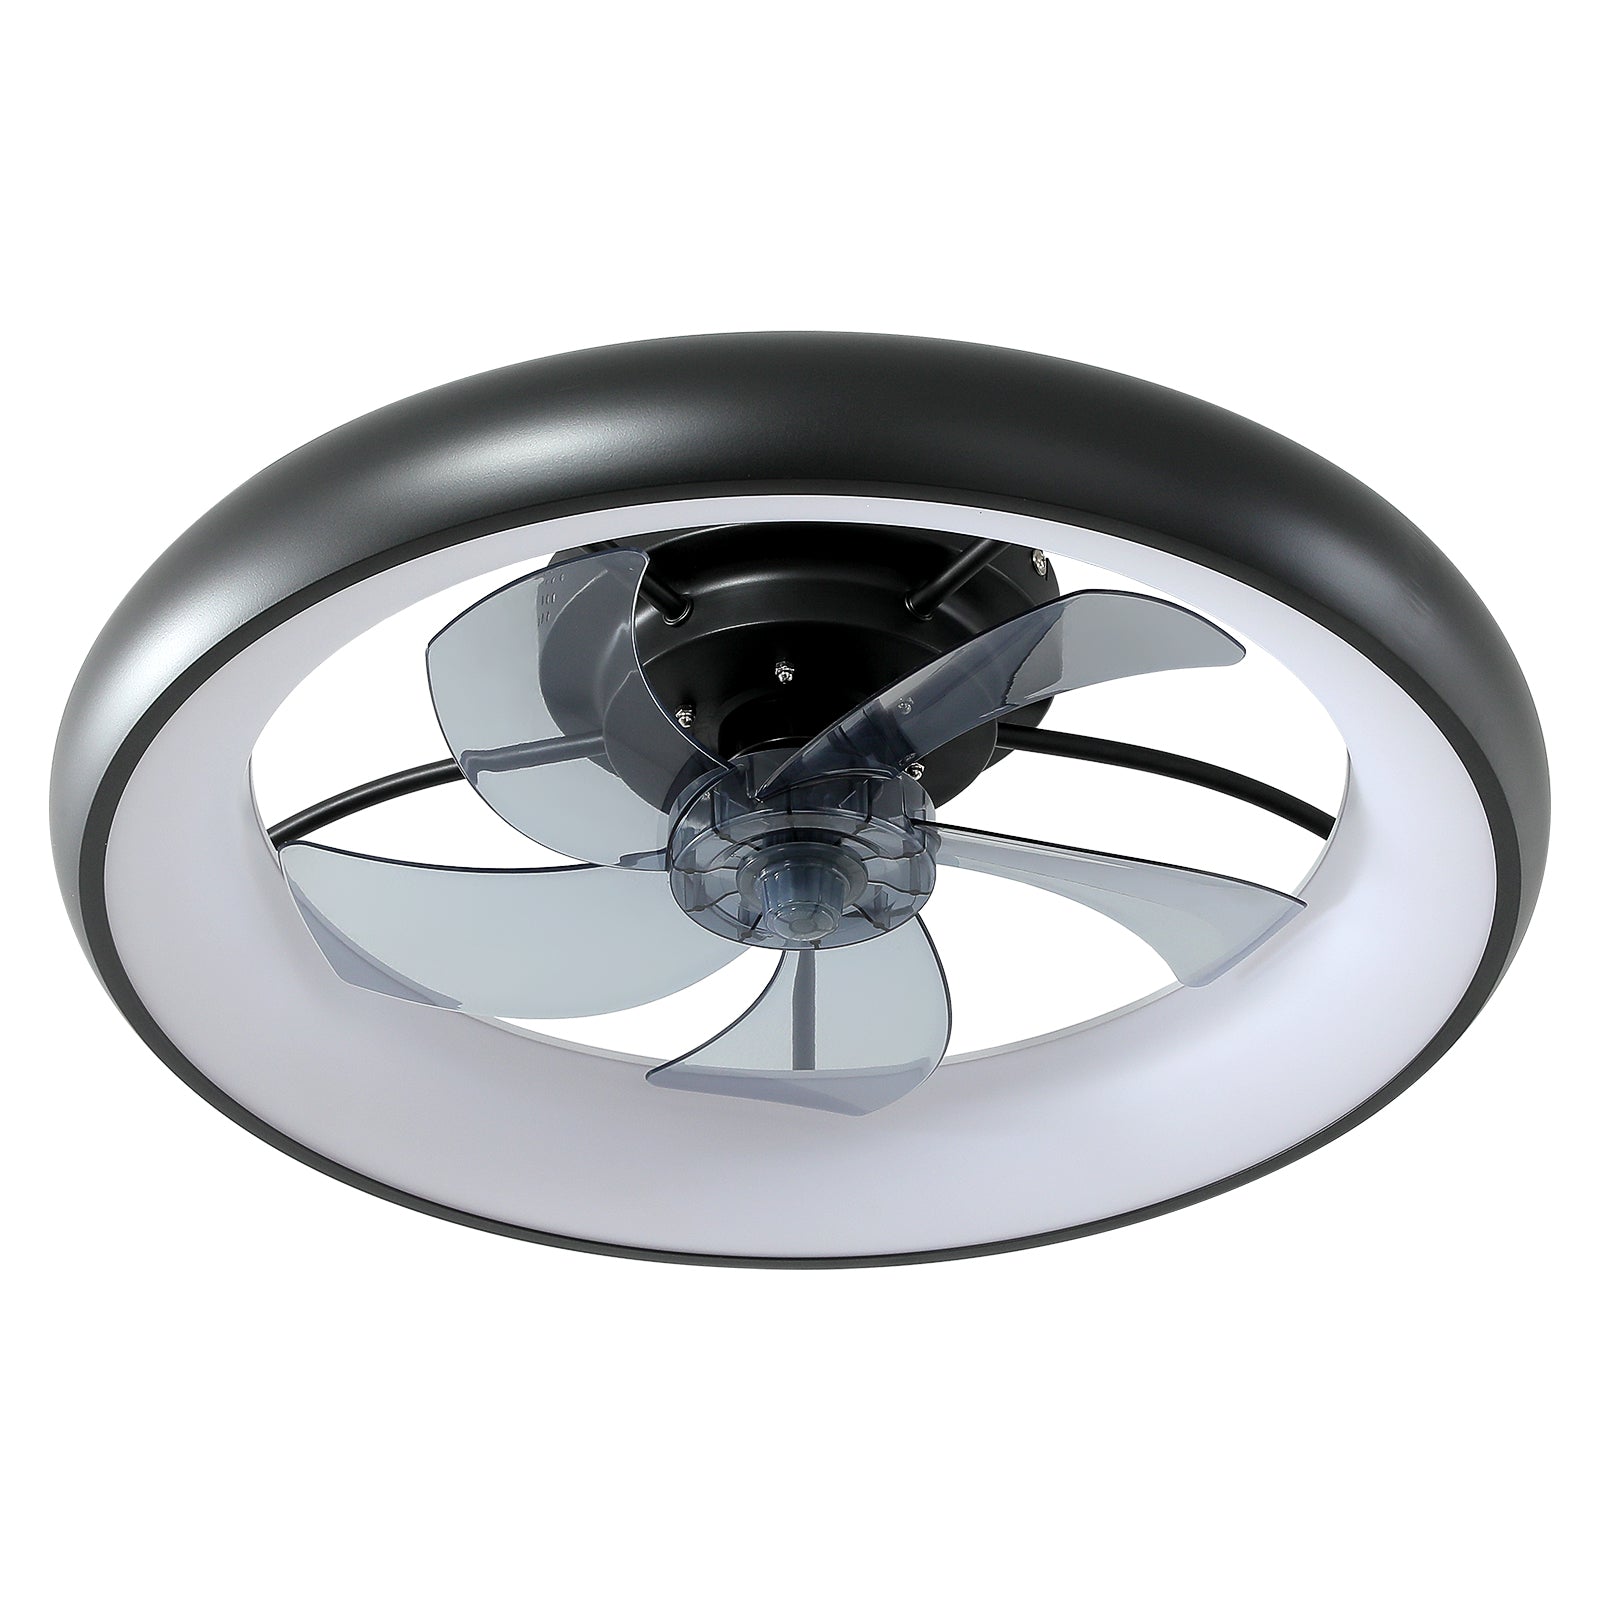 Viola Invisible Blades Semi Flush Mount Fan With 6-speed Speed Adjustment Function For Living Room